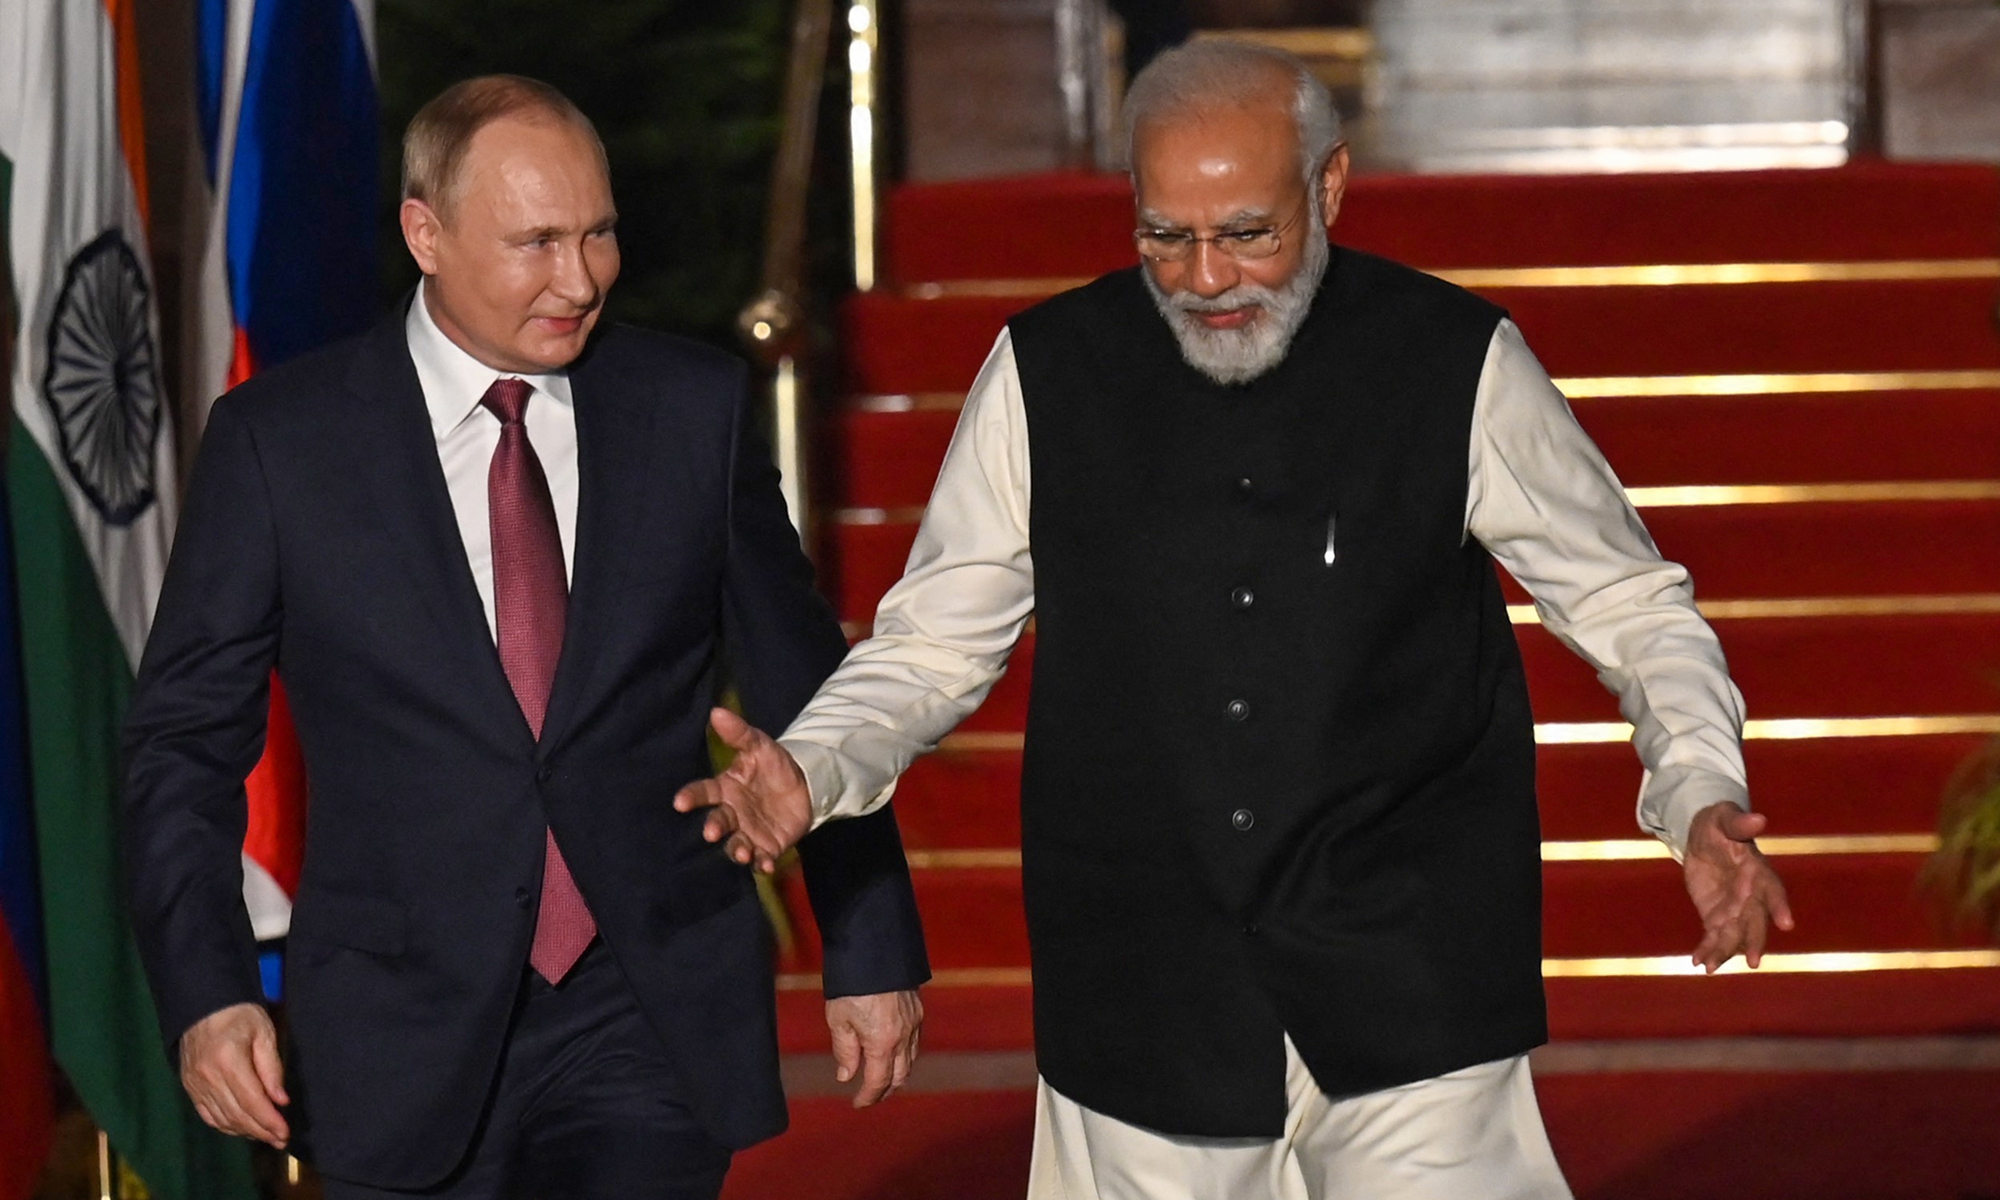 India's Prime Minister Narendra Modi (right) greets Russian President Vladimir Putin before a meeting at Hyderabad House in New Delhi on December 6, 2021. Photo: AFP